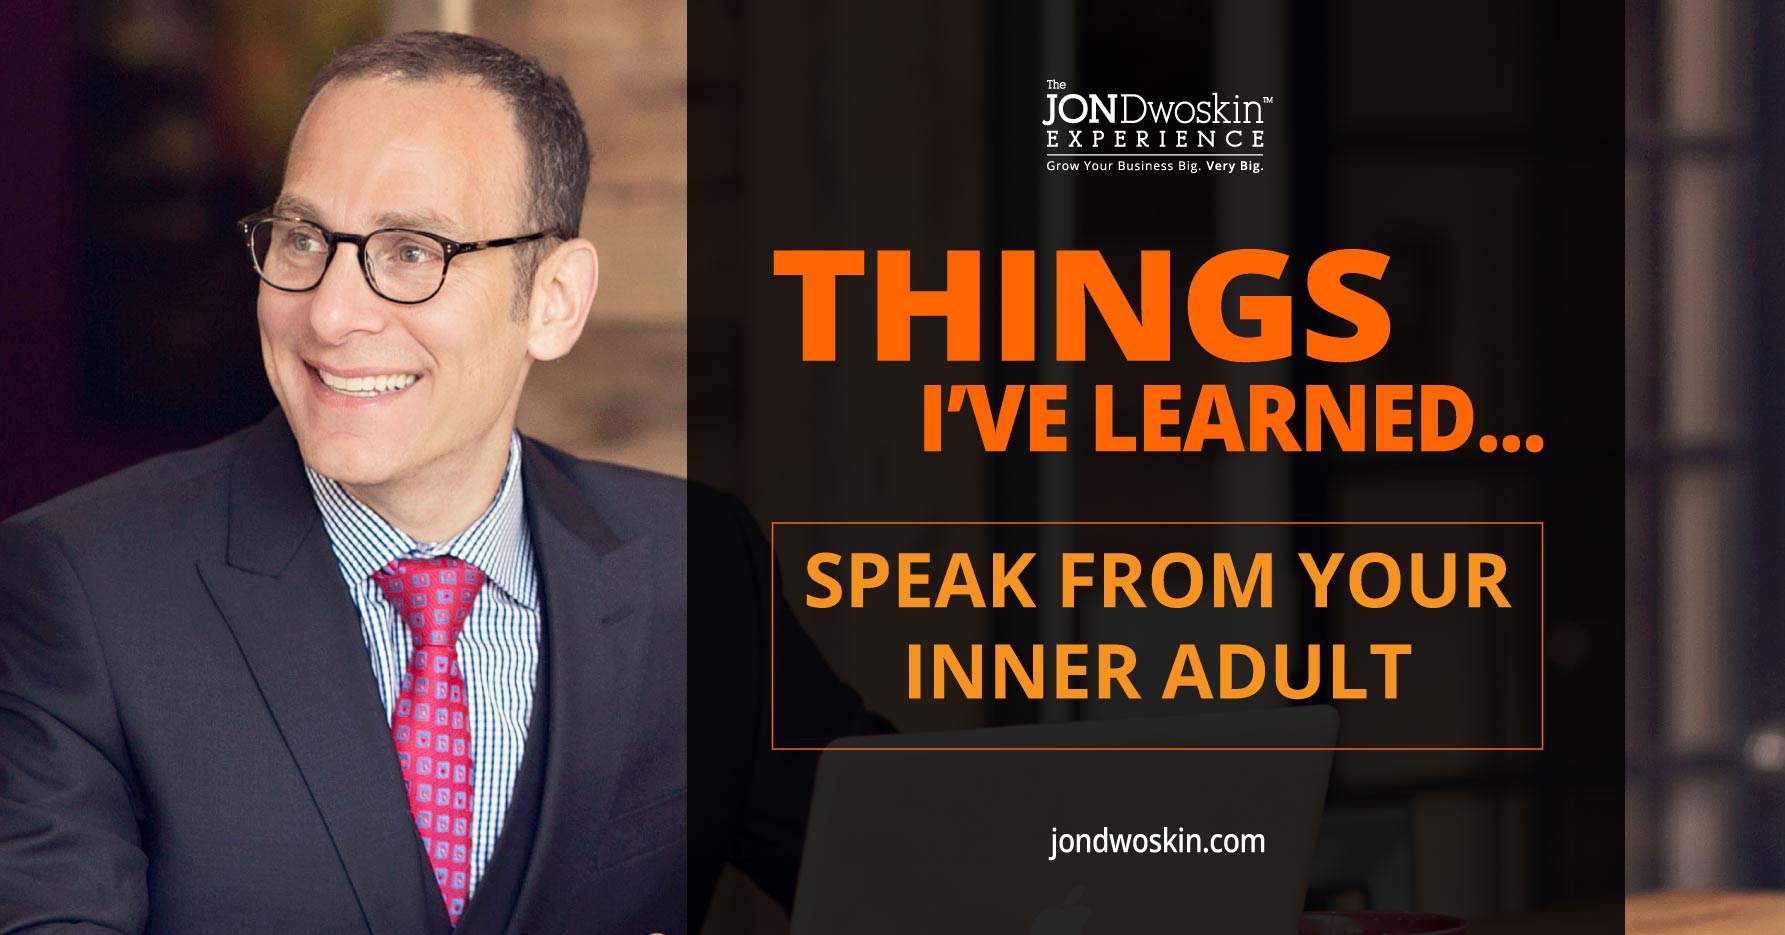 5 Things I’ve Learned in My 50 Years: Speak from Your Inner Adult